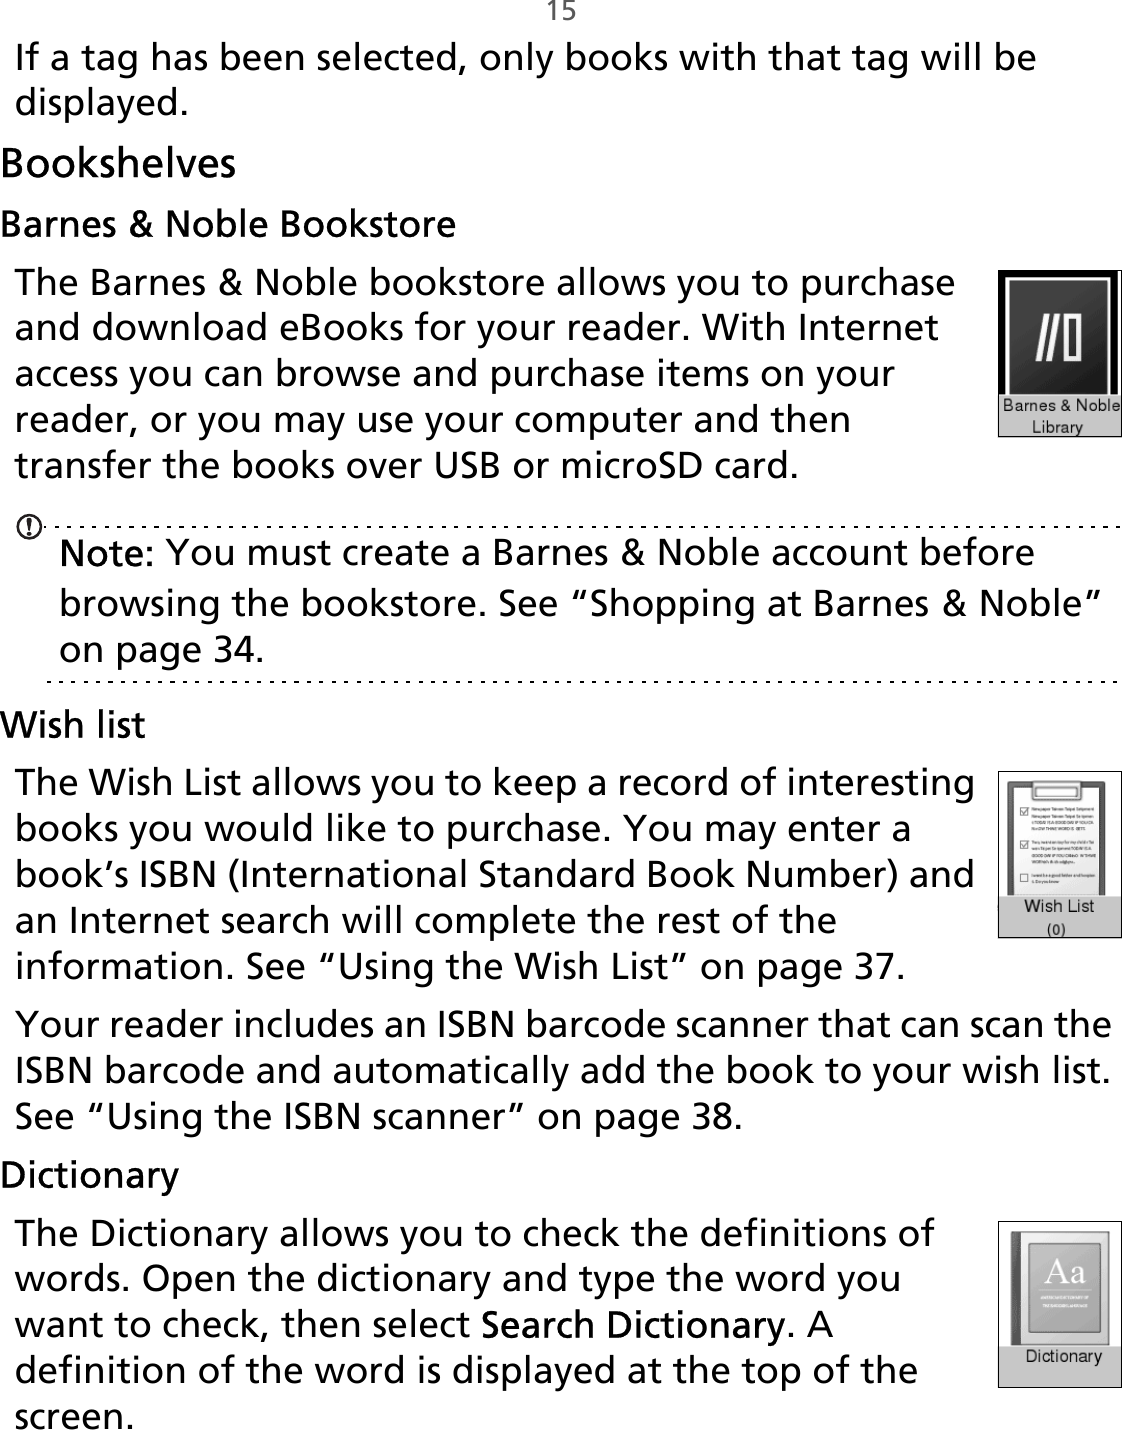 15If a tag has been selected, only books with that tag will be displayed. BookshelvesBarnes &amp; Noble BookstoreThe Barnes &amp; Noble bookstore allows you to purchase and download eBooks for your reader. With Internet access you can browse and purchase items on your reader, or you may use your computer and then transfer the books over USB or microSD card.Note: You must create a Barnes &amp; Noble account before browsing the bookstore. See “Shopping at Barnes󵛑&amp;󵛑Noble” on page 34.Wish listThe Wish List allows you to keep a record of interesting books you would like to purchase. You may enter a book’s ISBN (International Standard Book Number) and an Internet search will complete the rest of the information. See “Using the Wish List” on page 37.Your reader includes an ISBN barcode scanner that can scan the ISBN barcode and automatically add the book to your wish list. See “Using the ISBN scanner” on page 38.DictionaryThe Dictionary allows you to check the definitions of words. Open the dictionary and type the word you want to check, then select Search Dictionary. A definition of the word is displayed at the top of the screen.